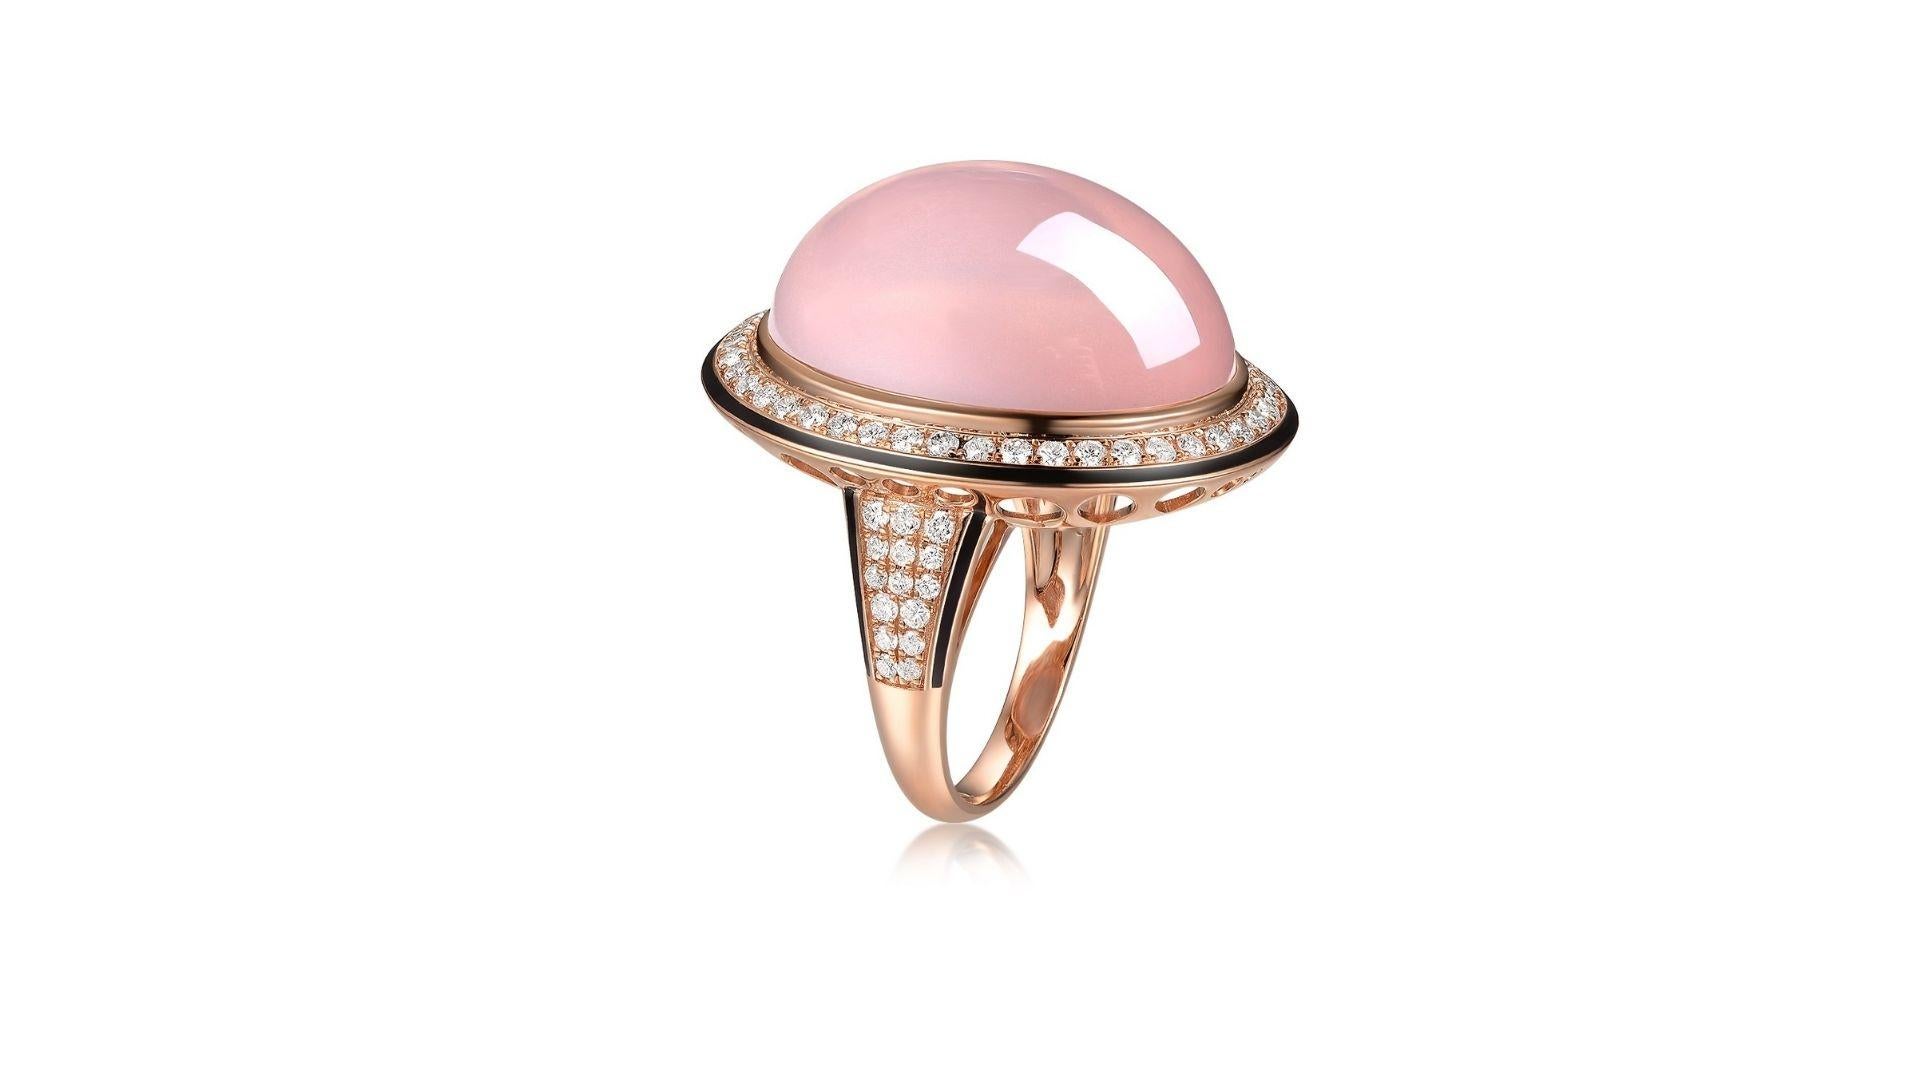 
A unique Rose  Quartz ring with 74 diamonds inc set in 18k yellow gold and really does stand out with the diamonds down each side of the band too.

Rose Quartz, 1pc Rose Quartz 30.82ct

Side Stone:
74pcs Diamond 0.73ct
